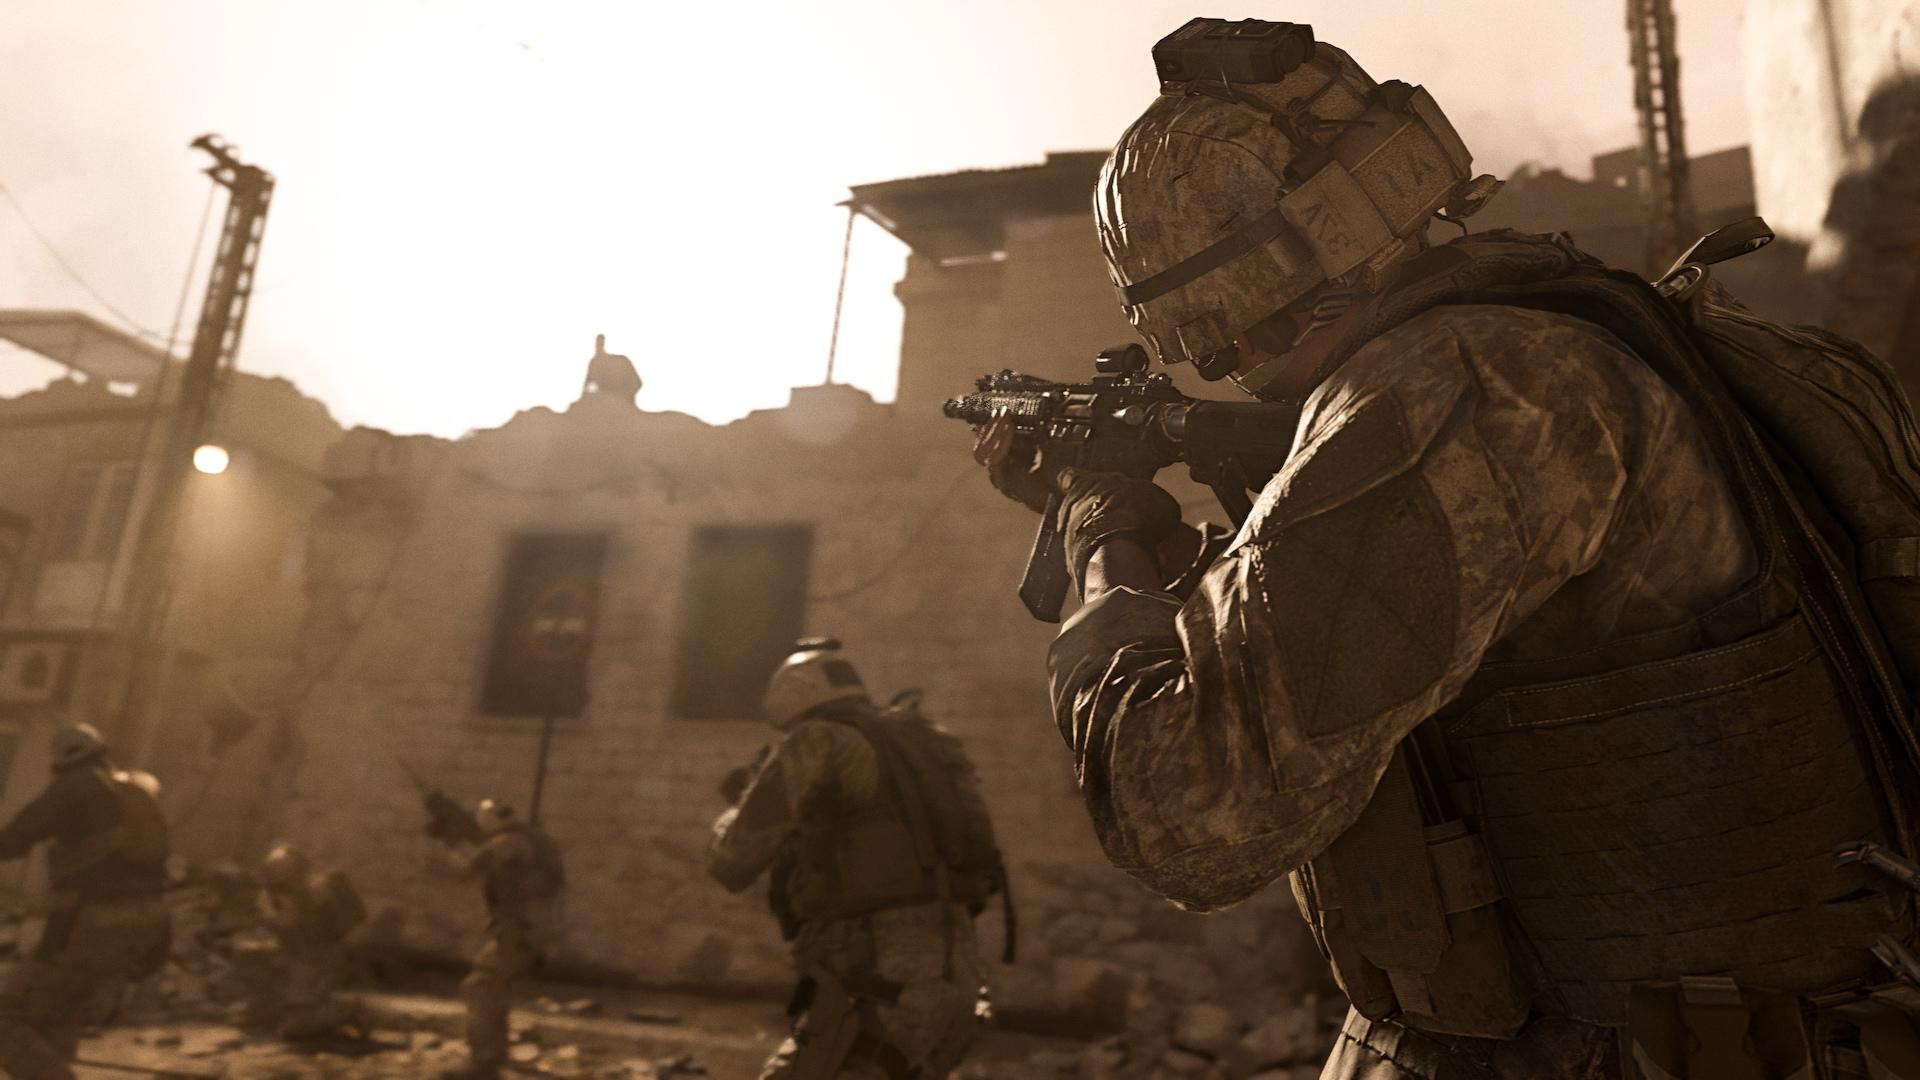 Duty: Modern Warfare 2 (2022) will be the most advanced experience in Franchise History Activision News 24